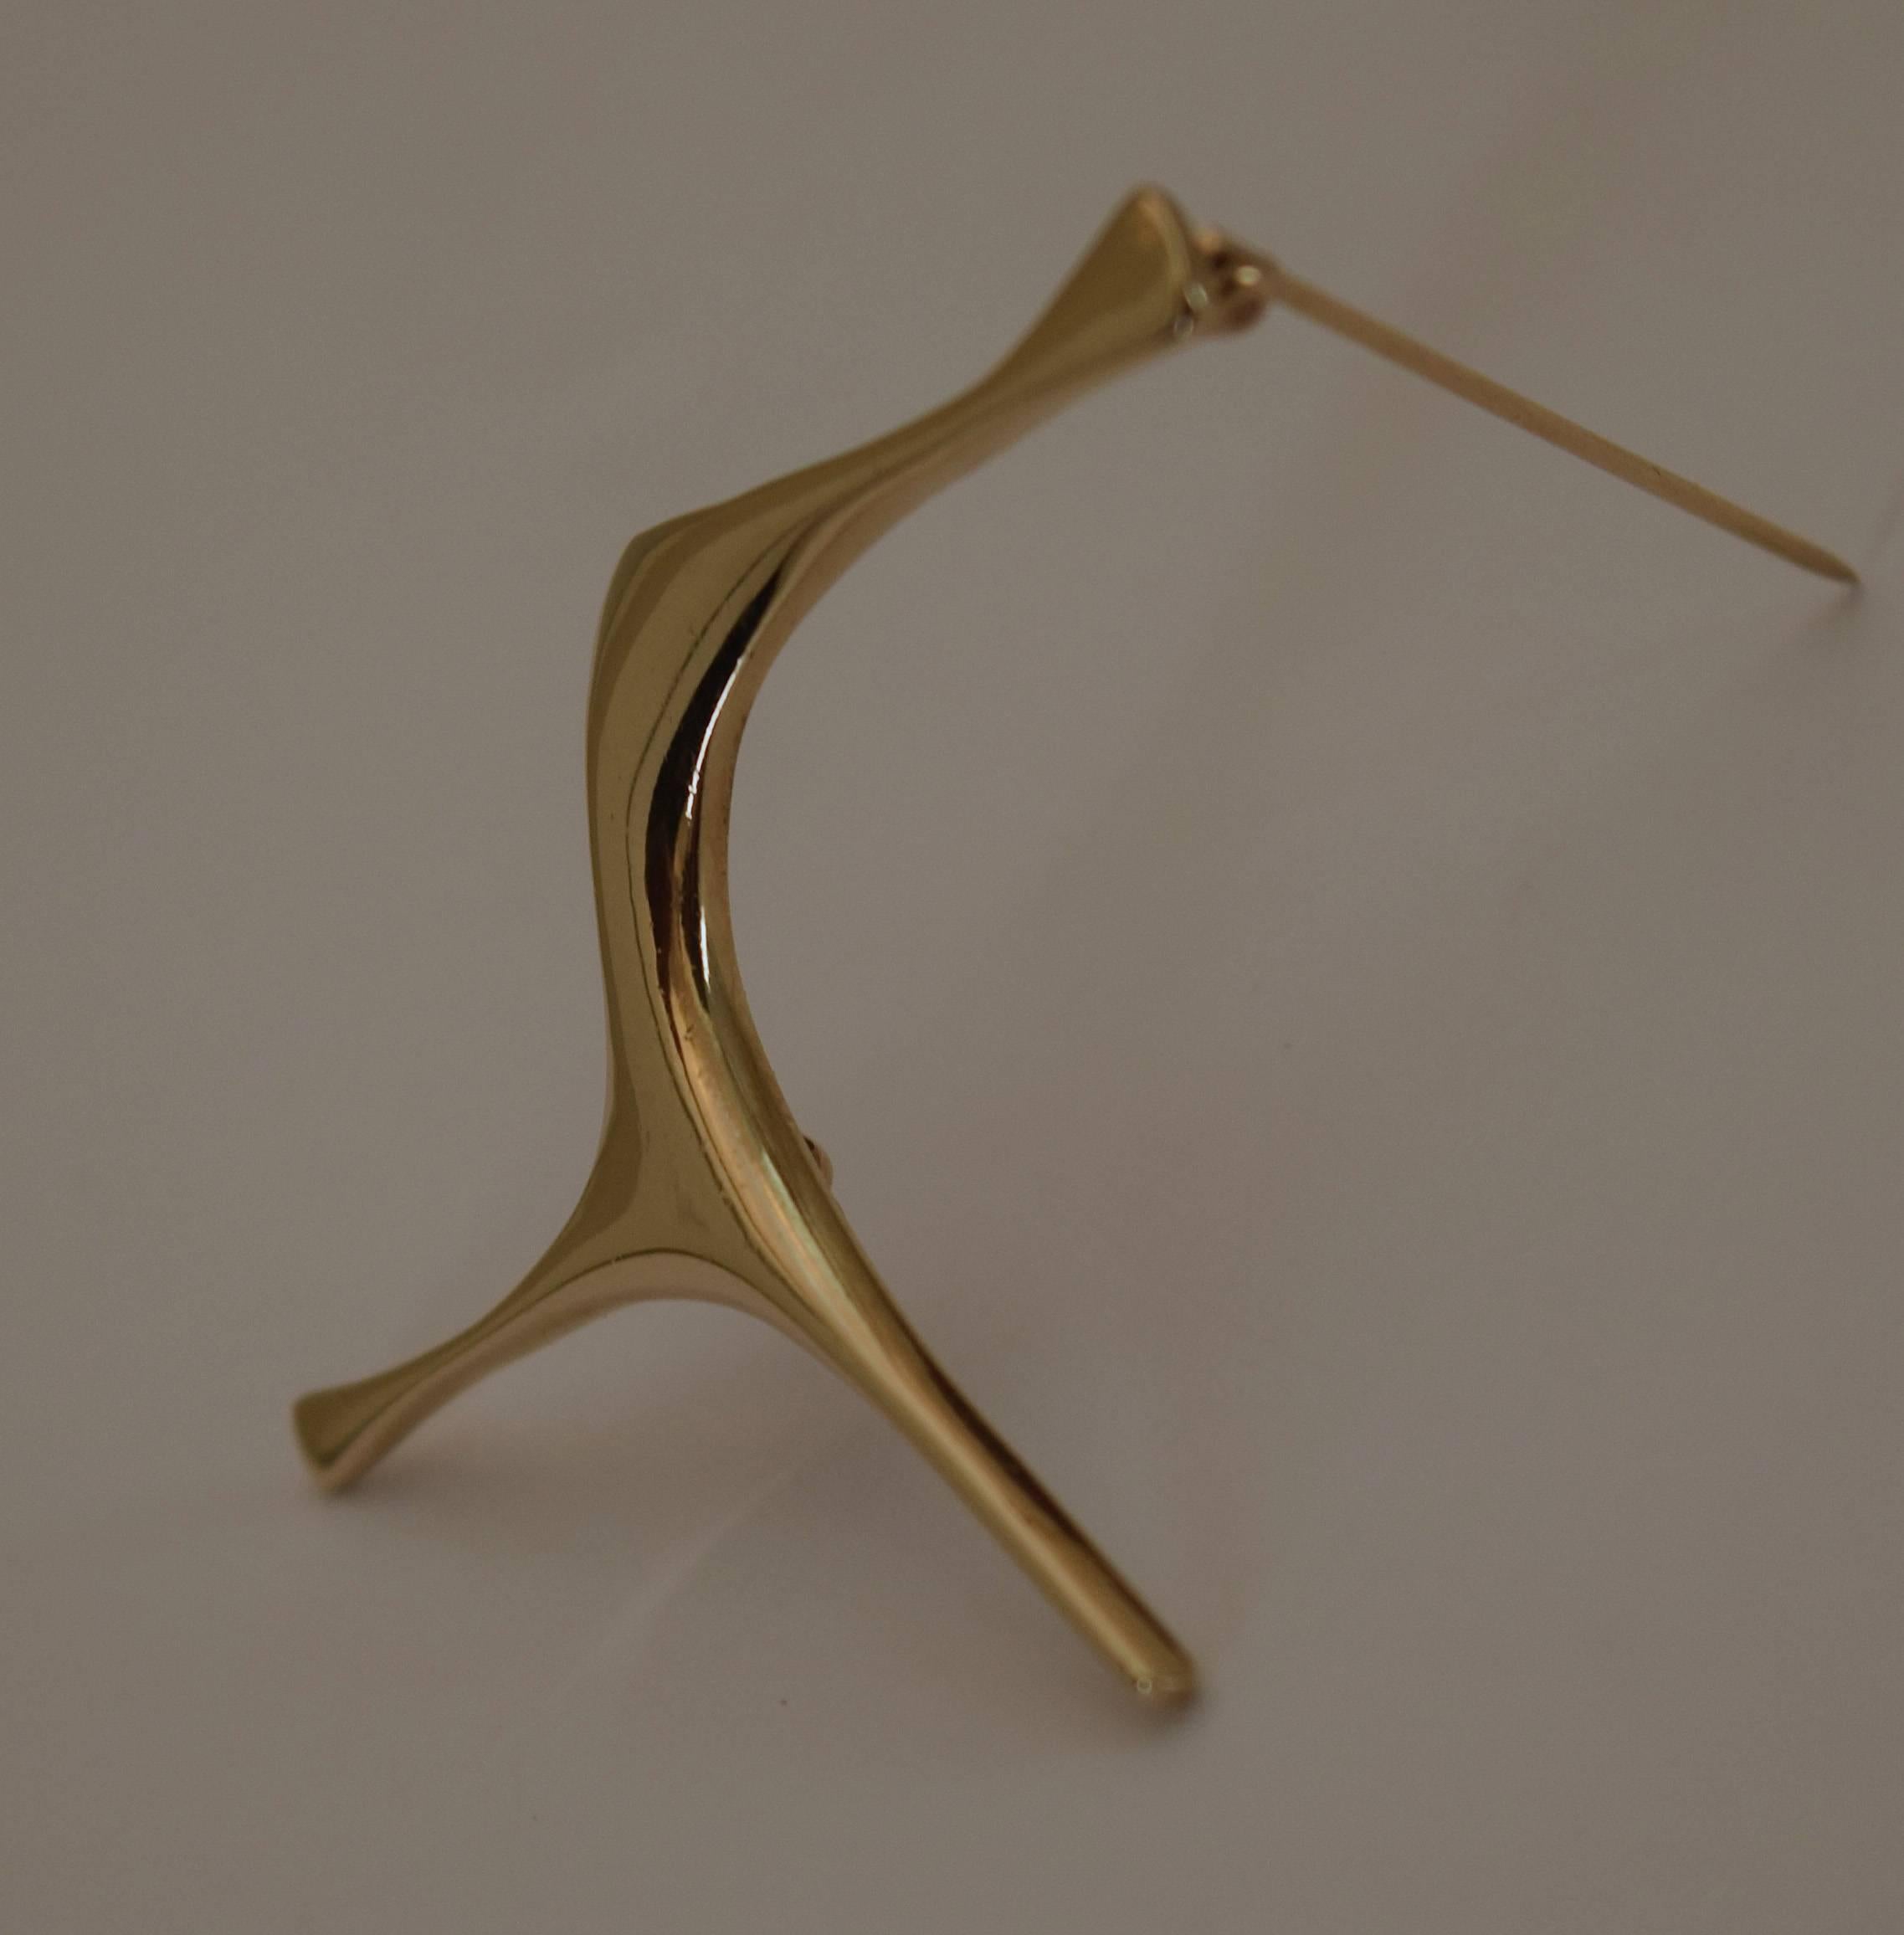 Hand-Crafted Gold Brooch by Ed Wiener, circa 1960s